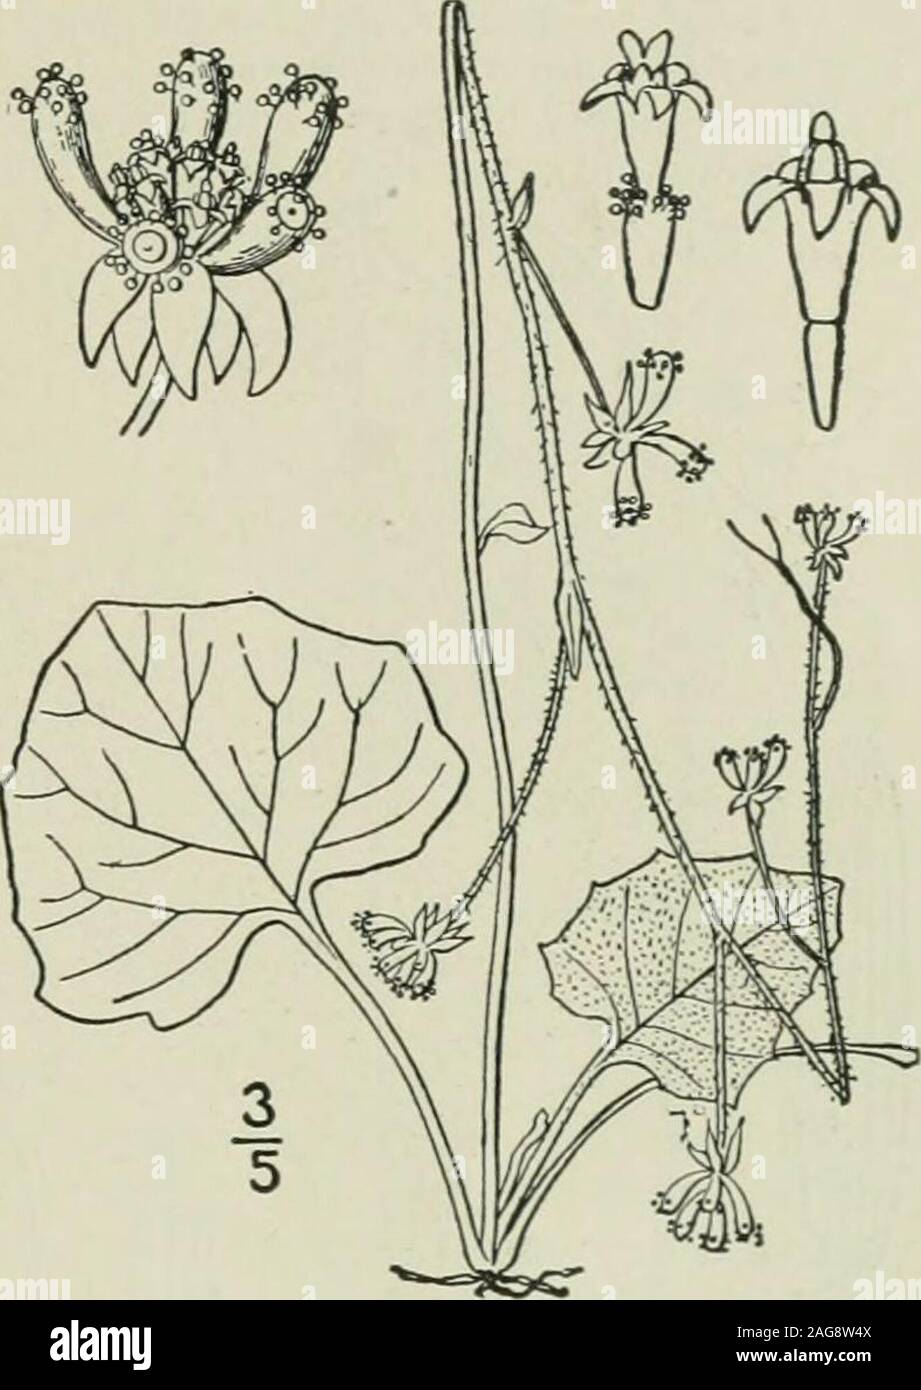 . An illustrated flora of the northern United States, Canada and the British possessions : from Newfoundland to the parallel of the southern boundary of Virginia and from the Atlantic Ocean westward to the 102nd meridian. led, small;bracts of the involucre 4 or 5, ovate to lanceolate, re-flexed in fruit, at length deciduous; achenes 3-4long, I thick, the upper part beset with nail-shapedglands. In moist woods, northern Michigan and Lake Superior toBritish Columbia, Montana and California. May-July. 47. INULA L. Sp. PI. 881. 1753. Perennial, mostly tomentose or woolly herbs, with alternate and Stock Photo